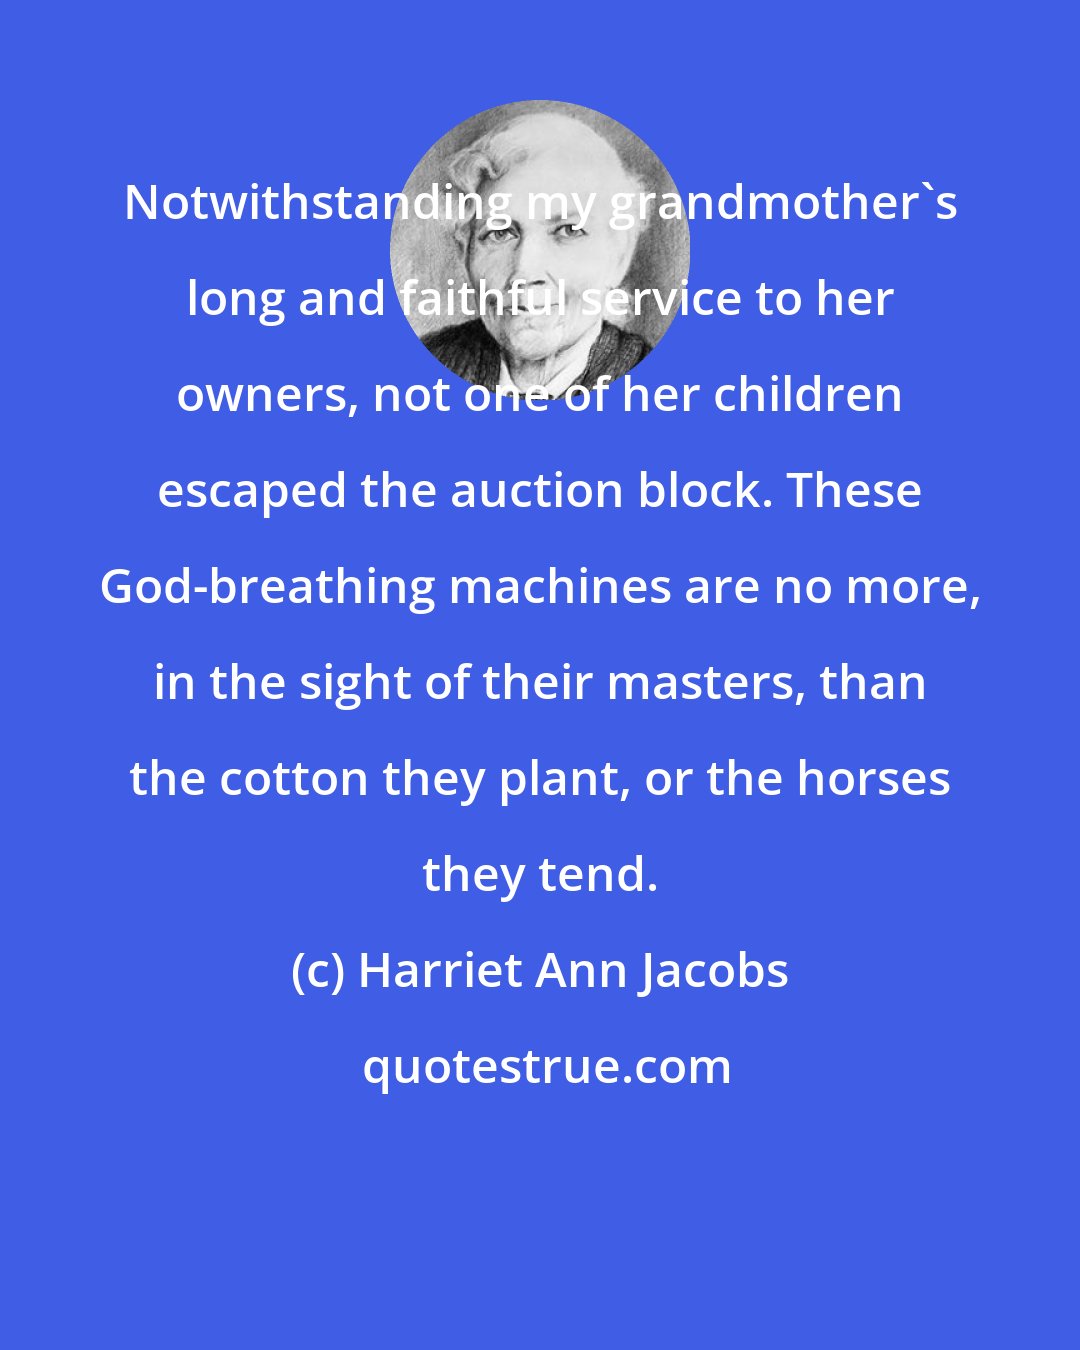 Harriet Ann Jacobs: Notwithstanding my grandmother's long and faithful service to her owners, not one of her children escaped the auction block. These God-breathing machines are no more, in the sight of their masters, than the cotton they plant, or the horses they tend.